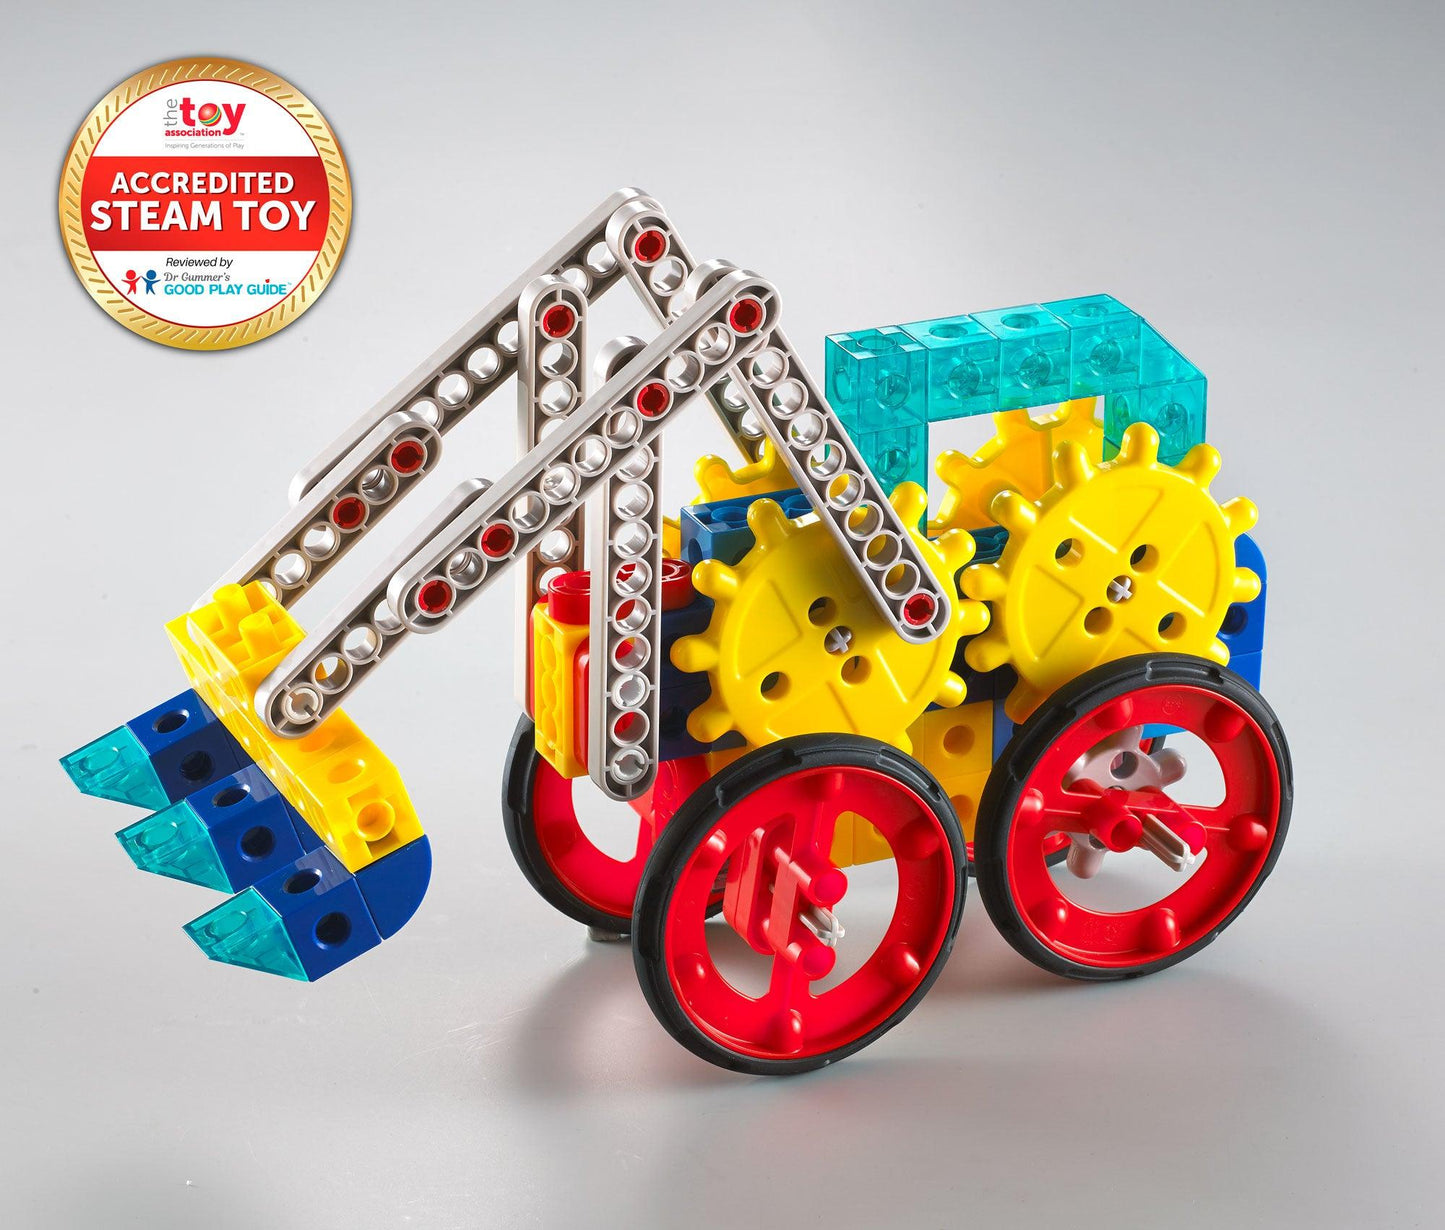 Shopedx - MyGears® as a STEAM Construction Toy for Your Children - www.shopedx.co.uk